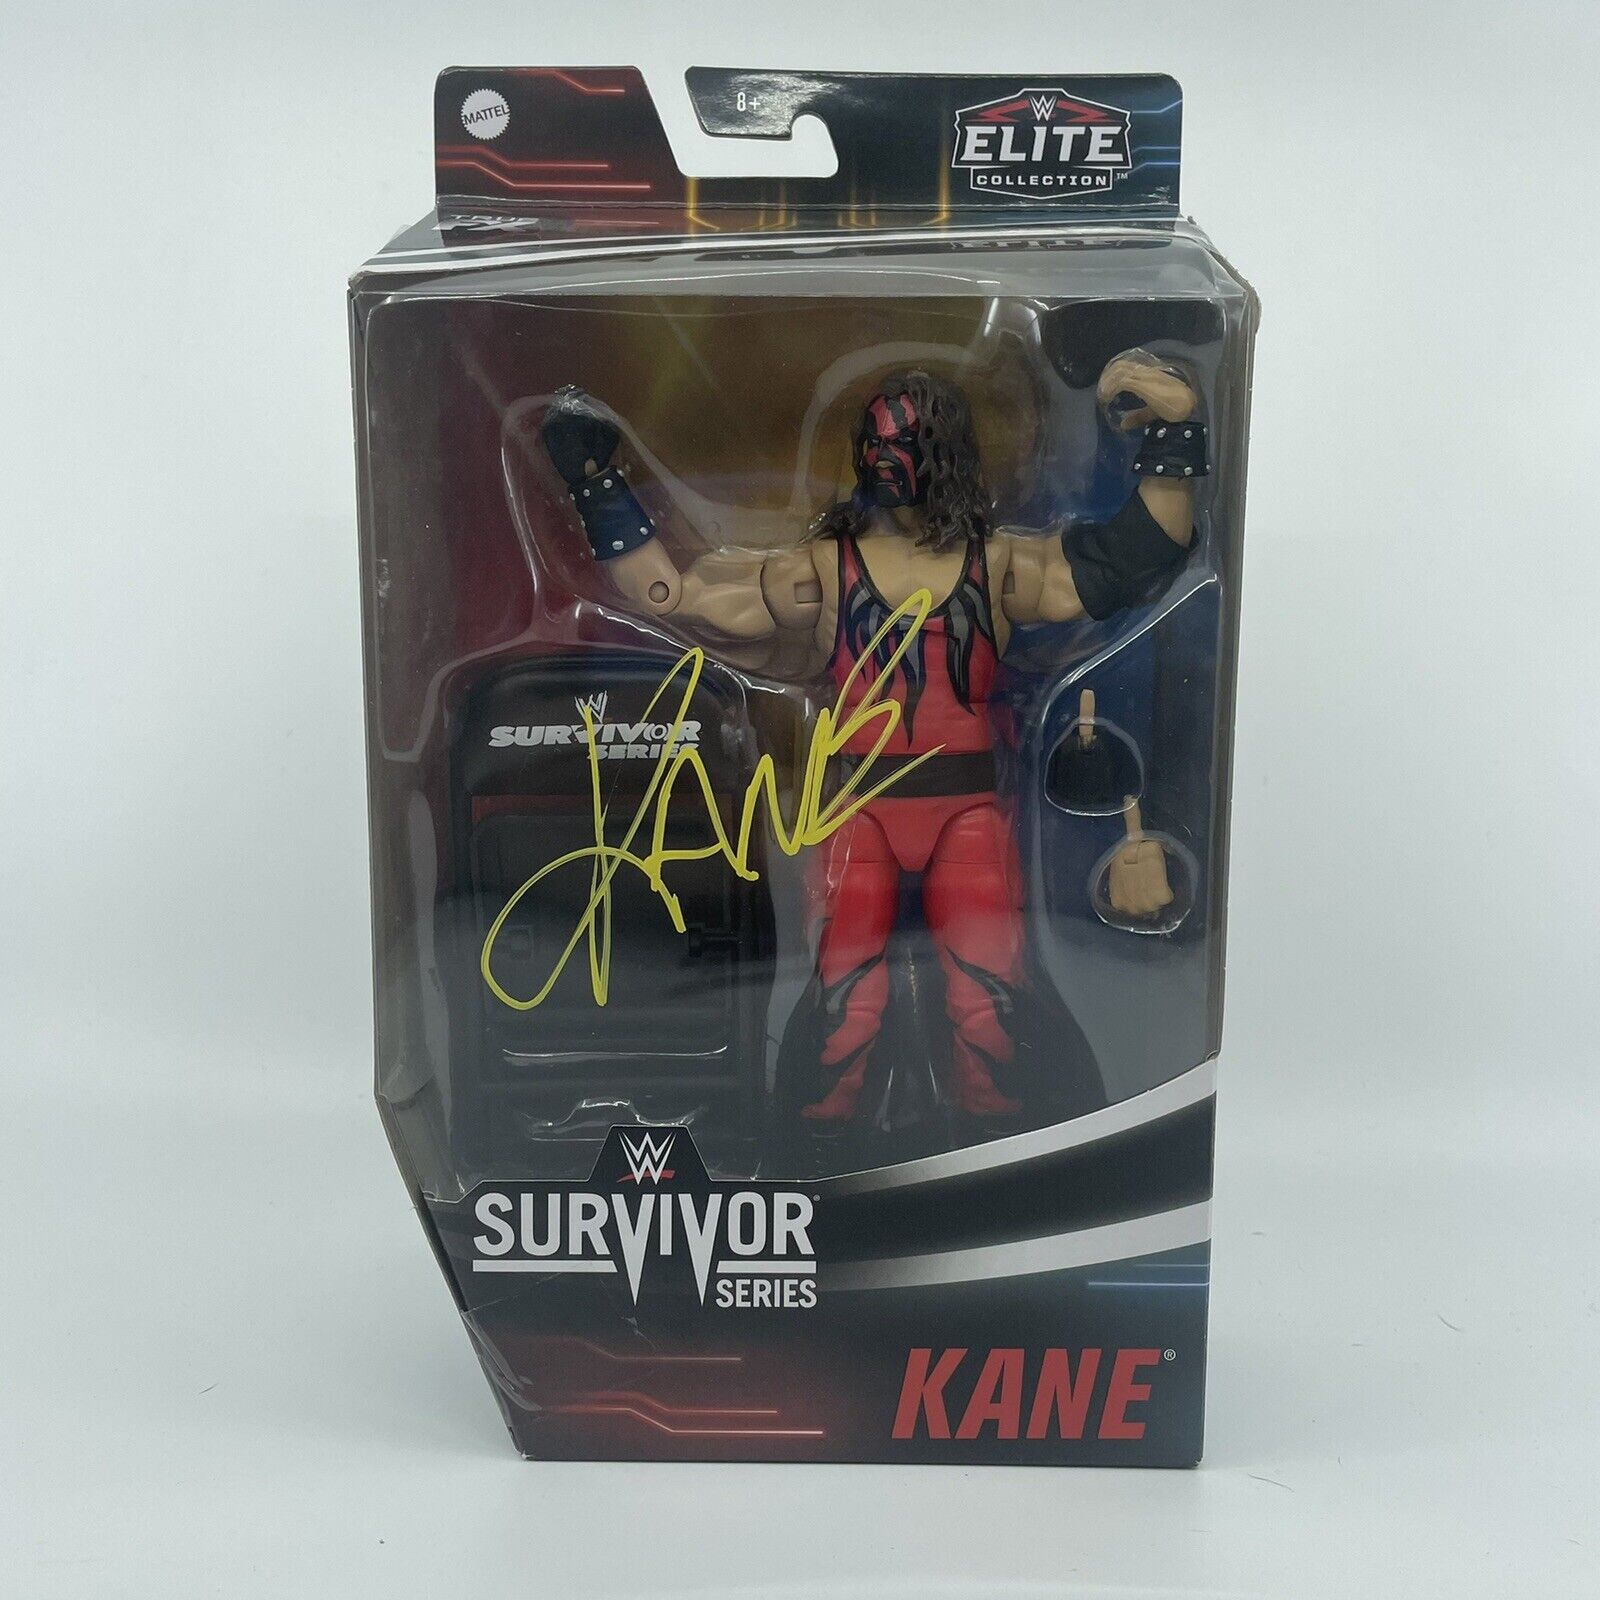 WWE WWF Kane Signed Atlanta Mall Autographed Elite Limited time trial price Action COA Figure JSA Auth